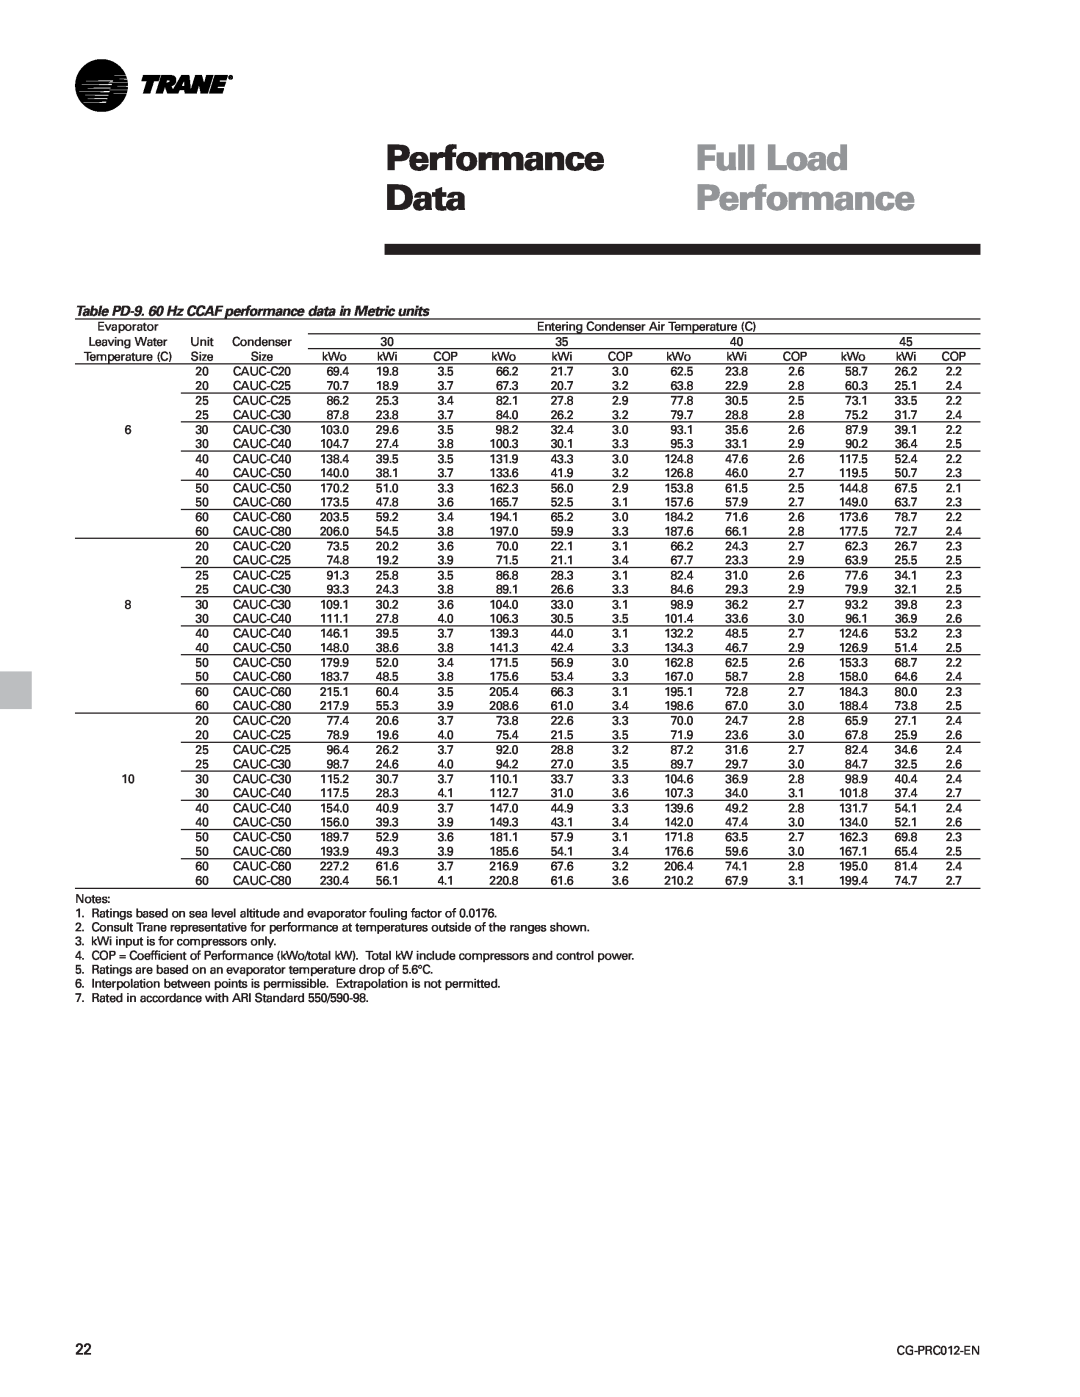 Trane CGWF manual Performance, Full Load, Data, Table PD-9. 60 Hz CCAF performance data in Metric units 